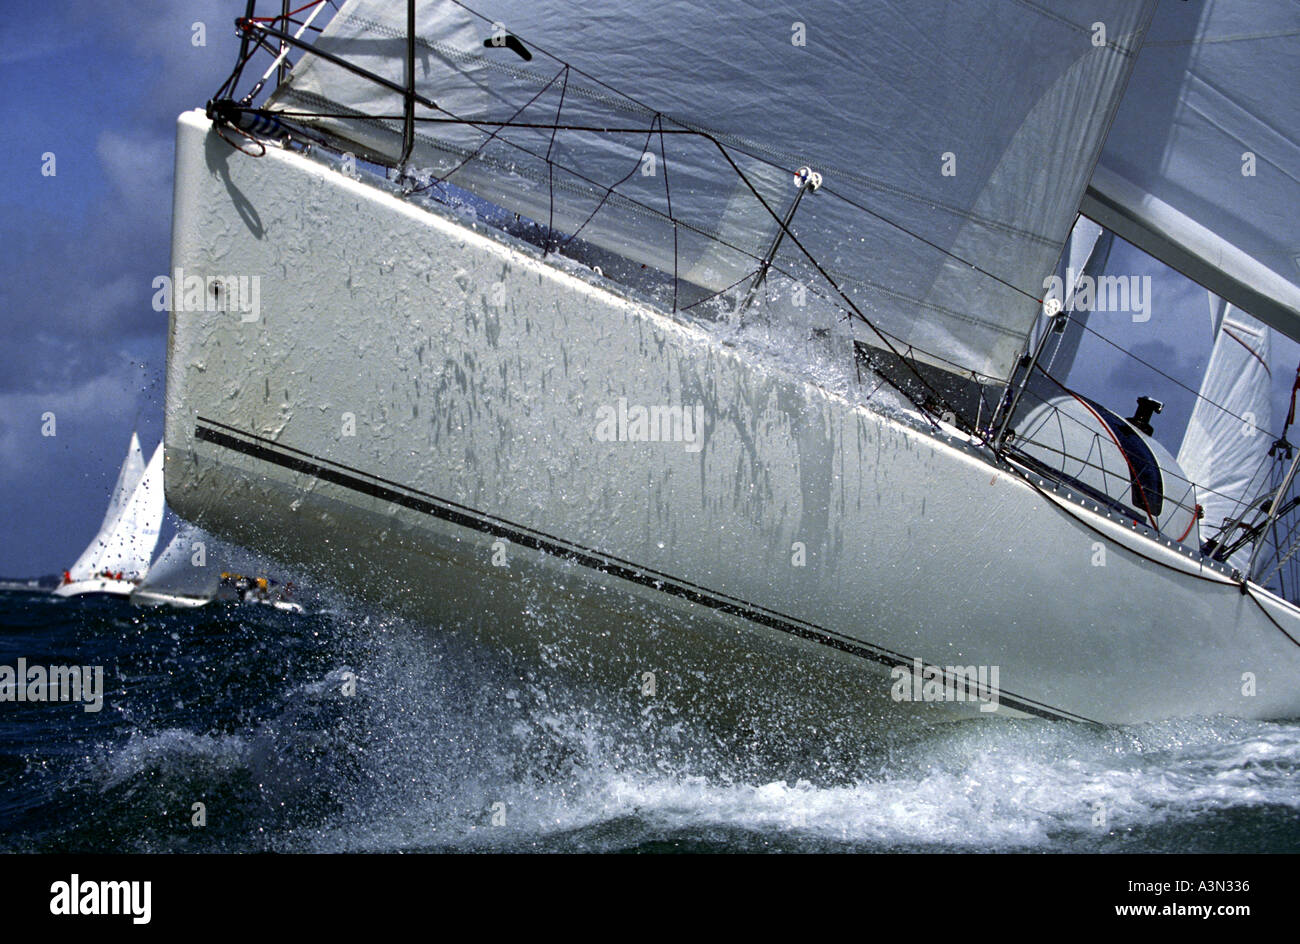 The bow of a Beneteau racing yacht rising out of the water Spi Ouest Race Week France Stock Photo